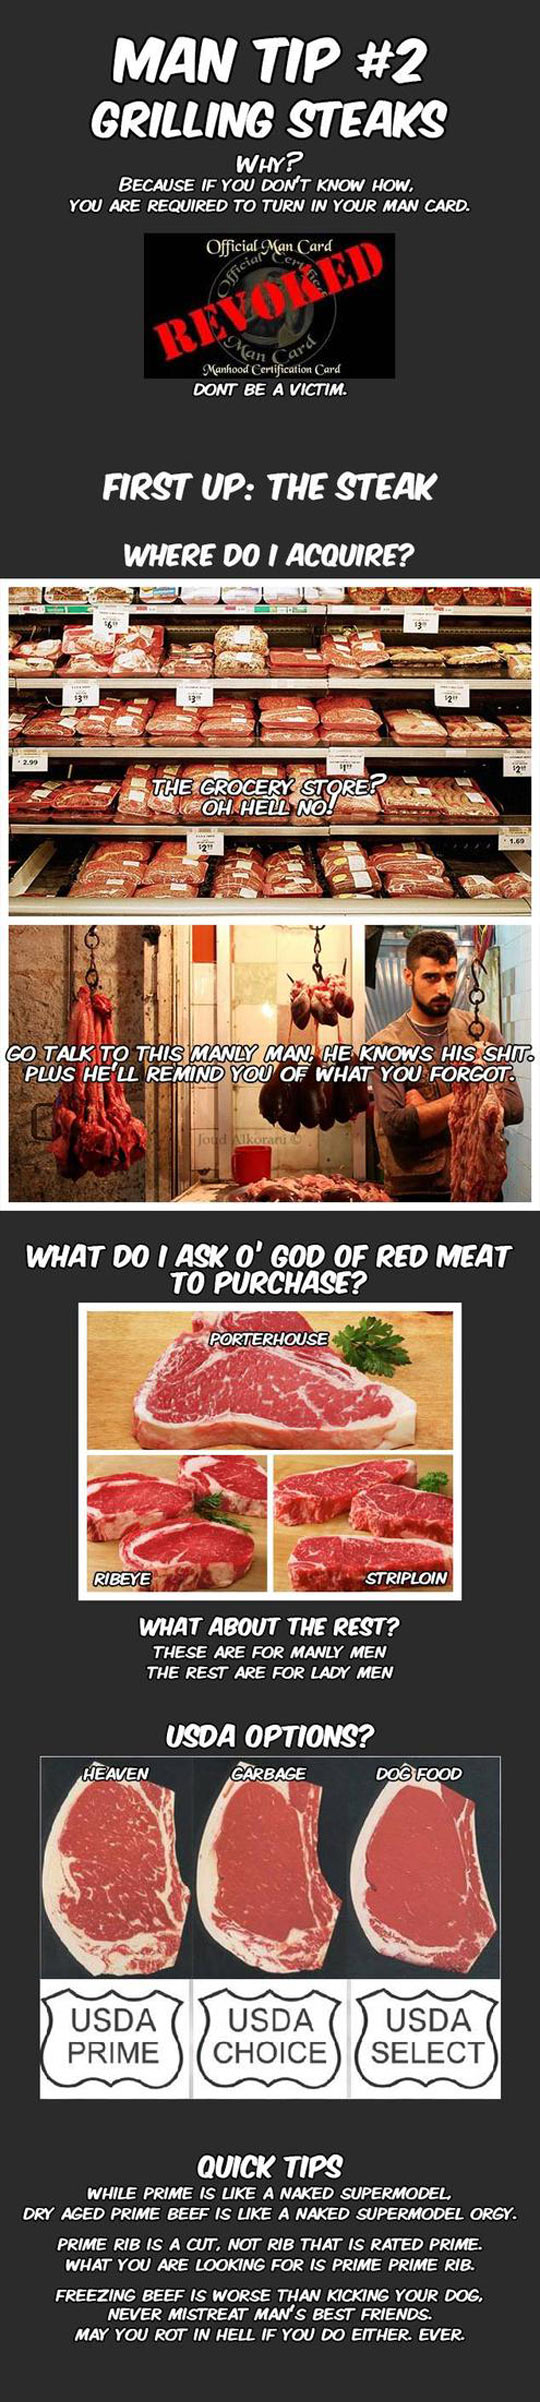 The carnivorous world we live in...